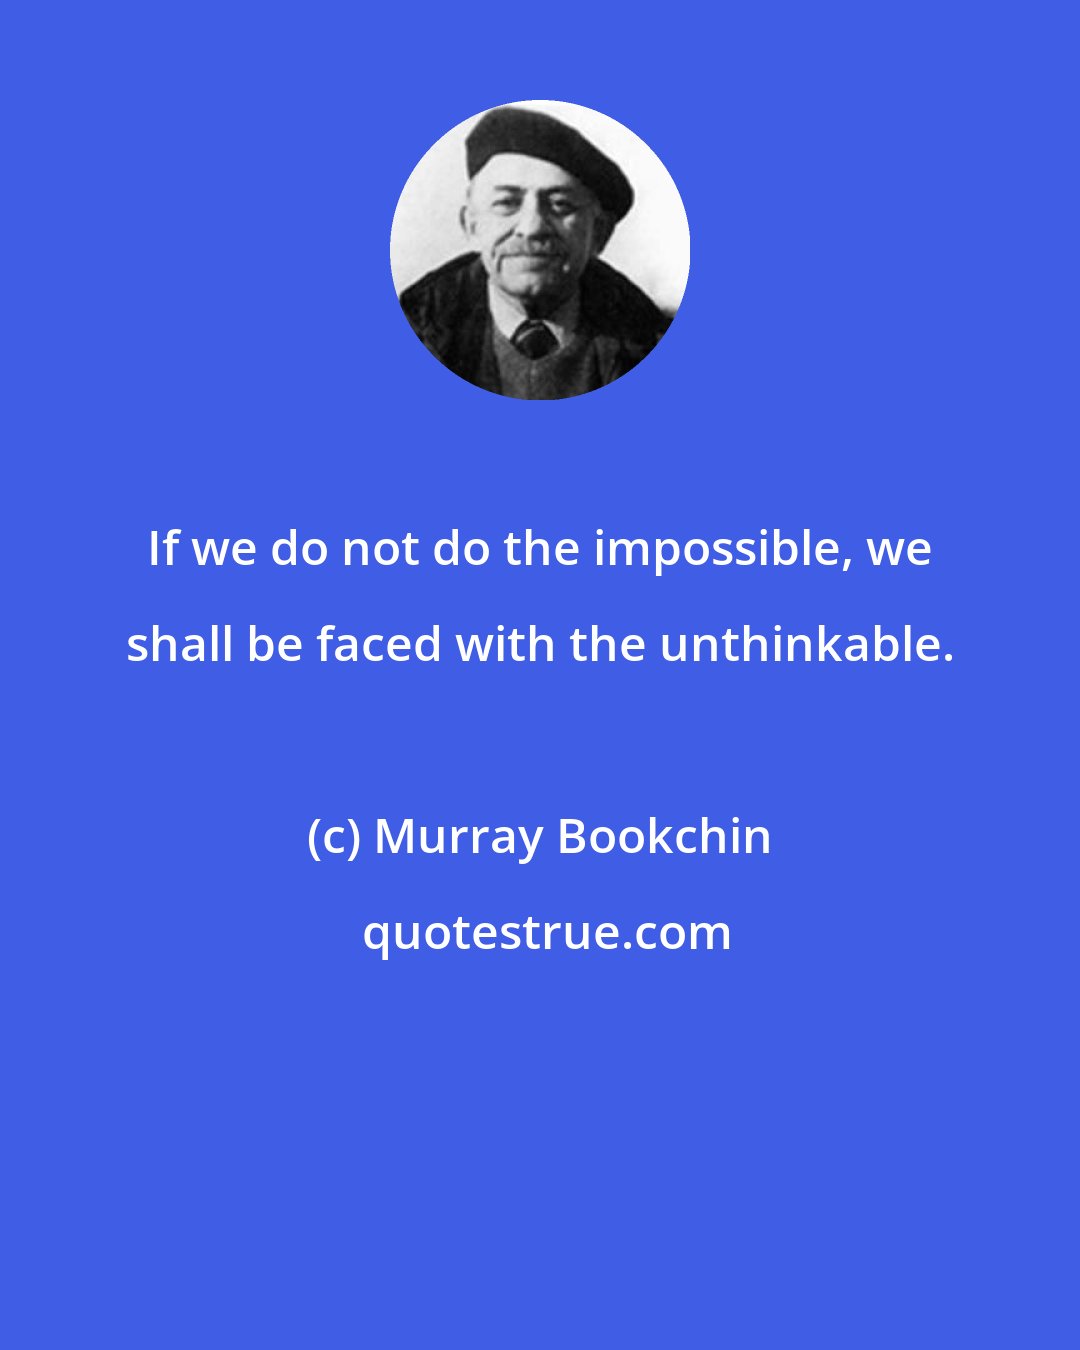 Murray Bookchin: If we do not do the impossible, we shall be faced with the unthinkable.